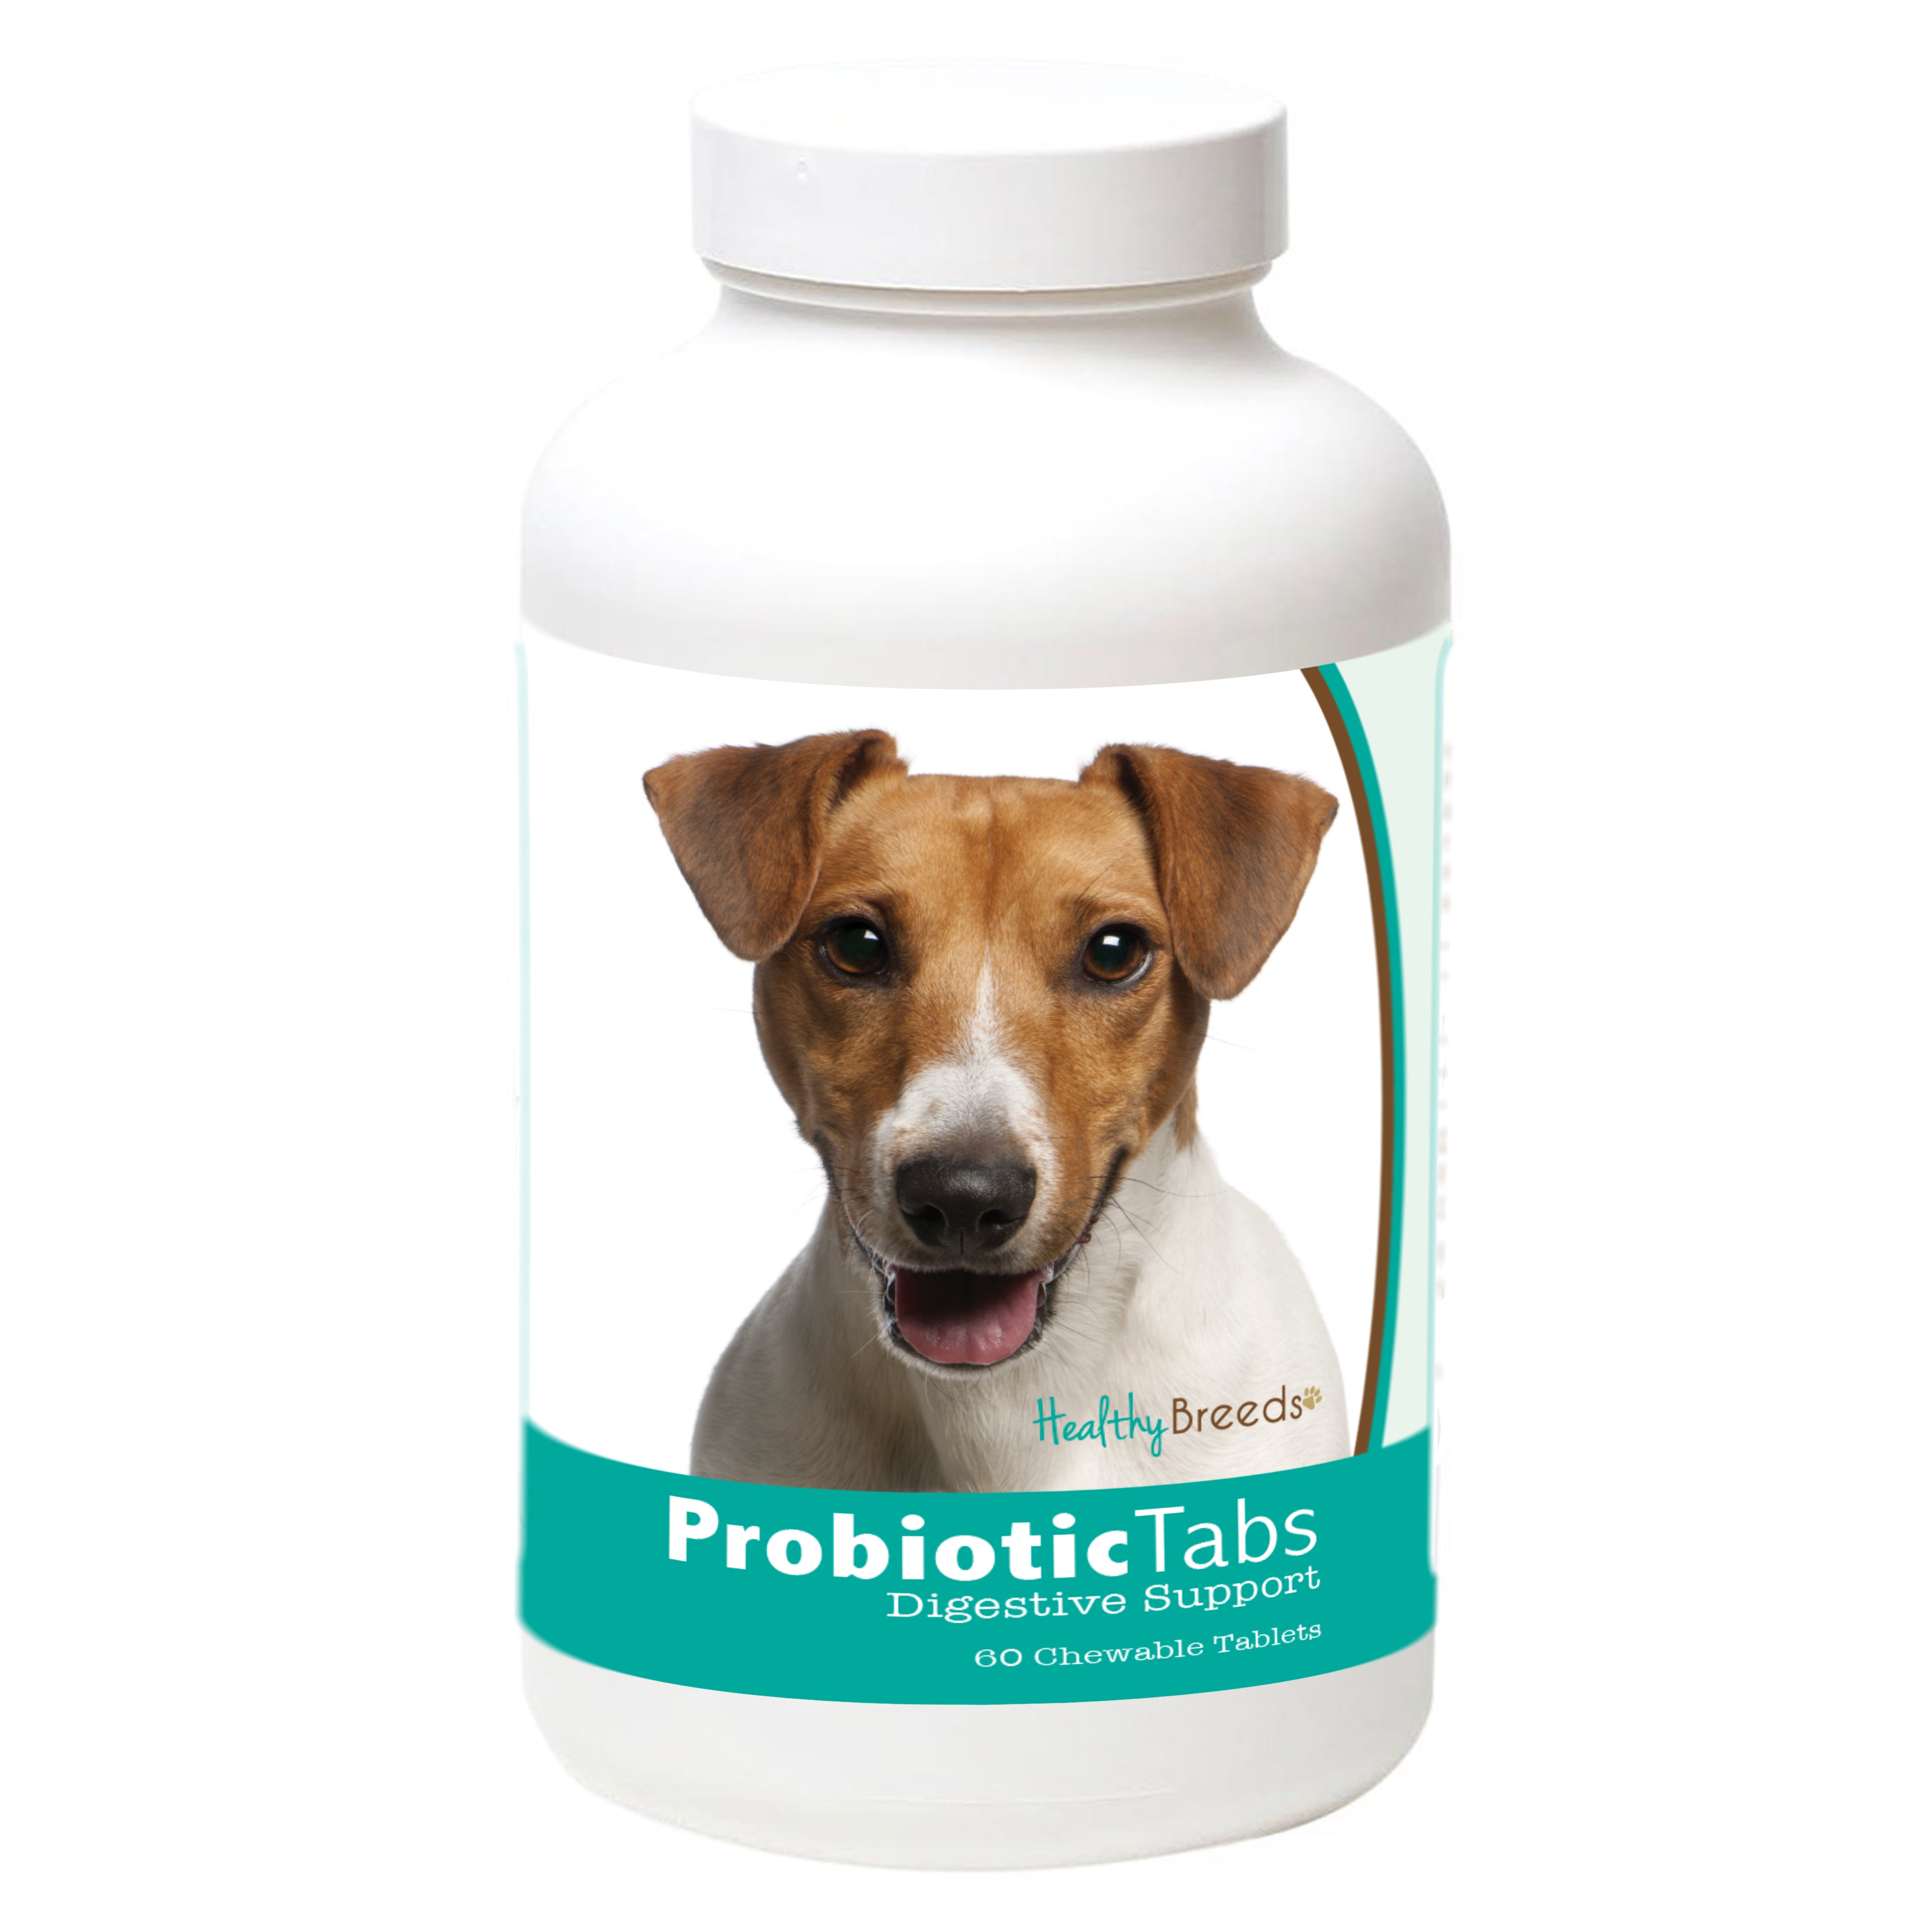 Jack Russell Terrier Probiotic and Digestive Support for Dogs 60 Count